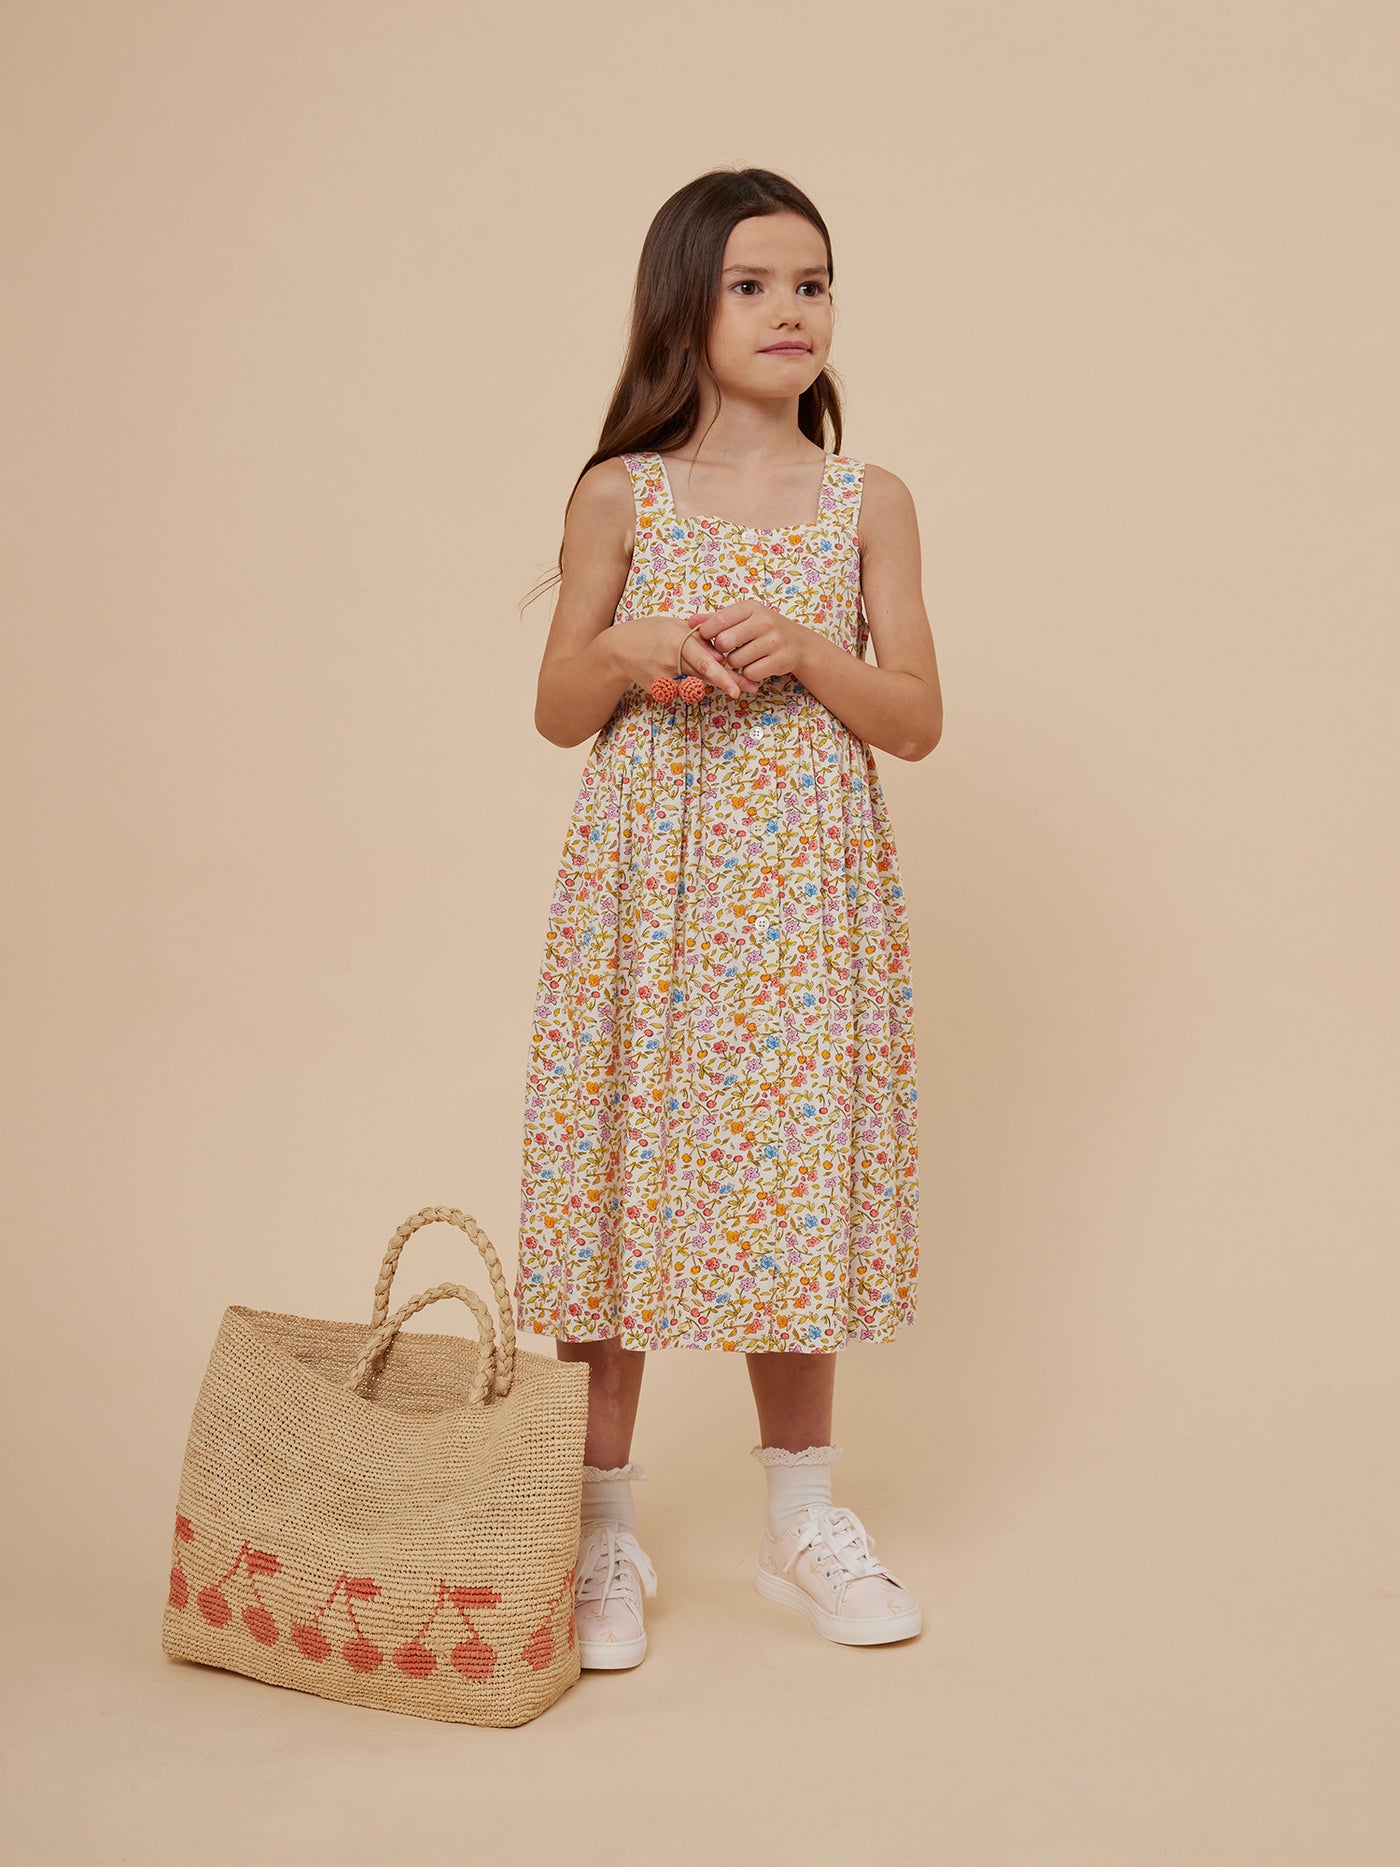 Cruise 2024 girl's look floral dress